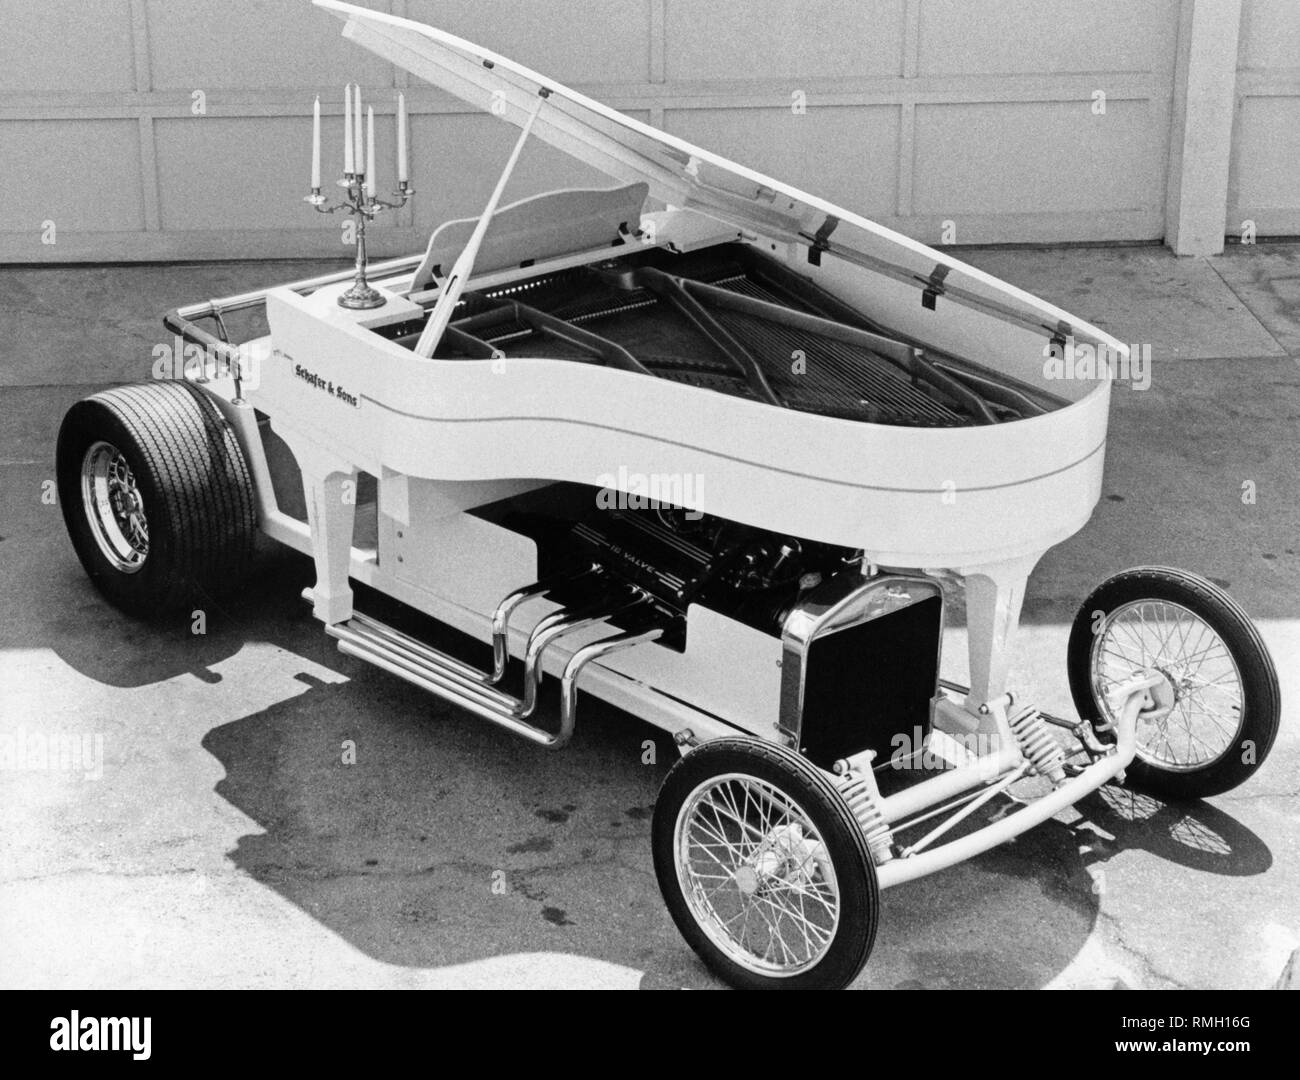 The American entertainer Liberace was supposed to open his shows on this car with a mounted piano, a fixed candlestick and 18ct gold-plated front wheels. However, the vehicle could never be used due to the musician's early death. The car is powered by a 327cui Chevrolet V8. Stock Photo